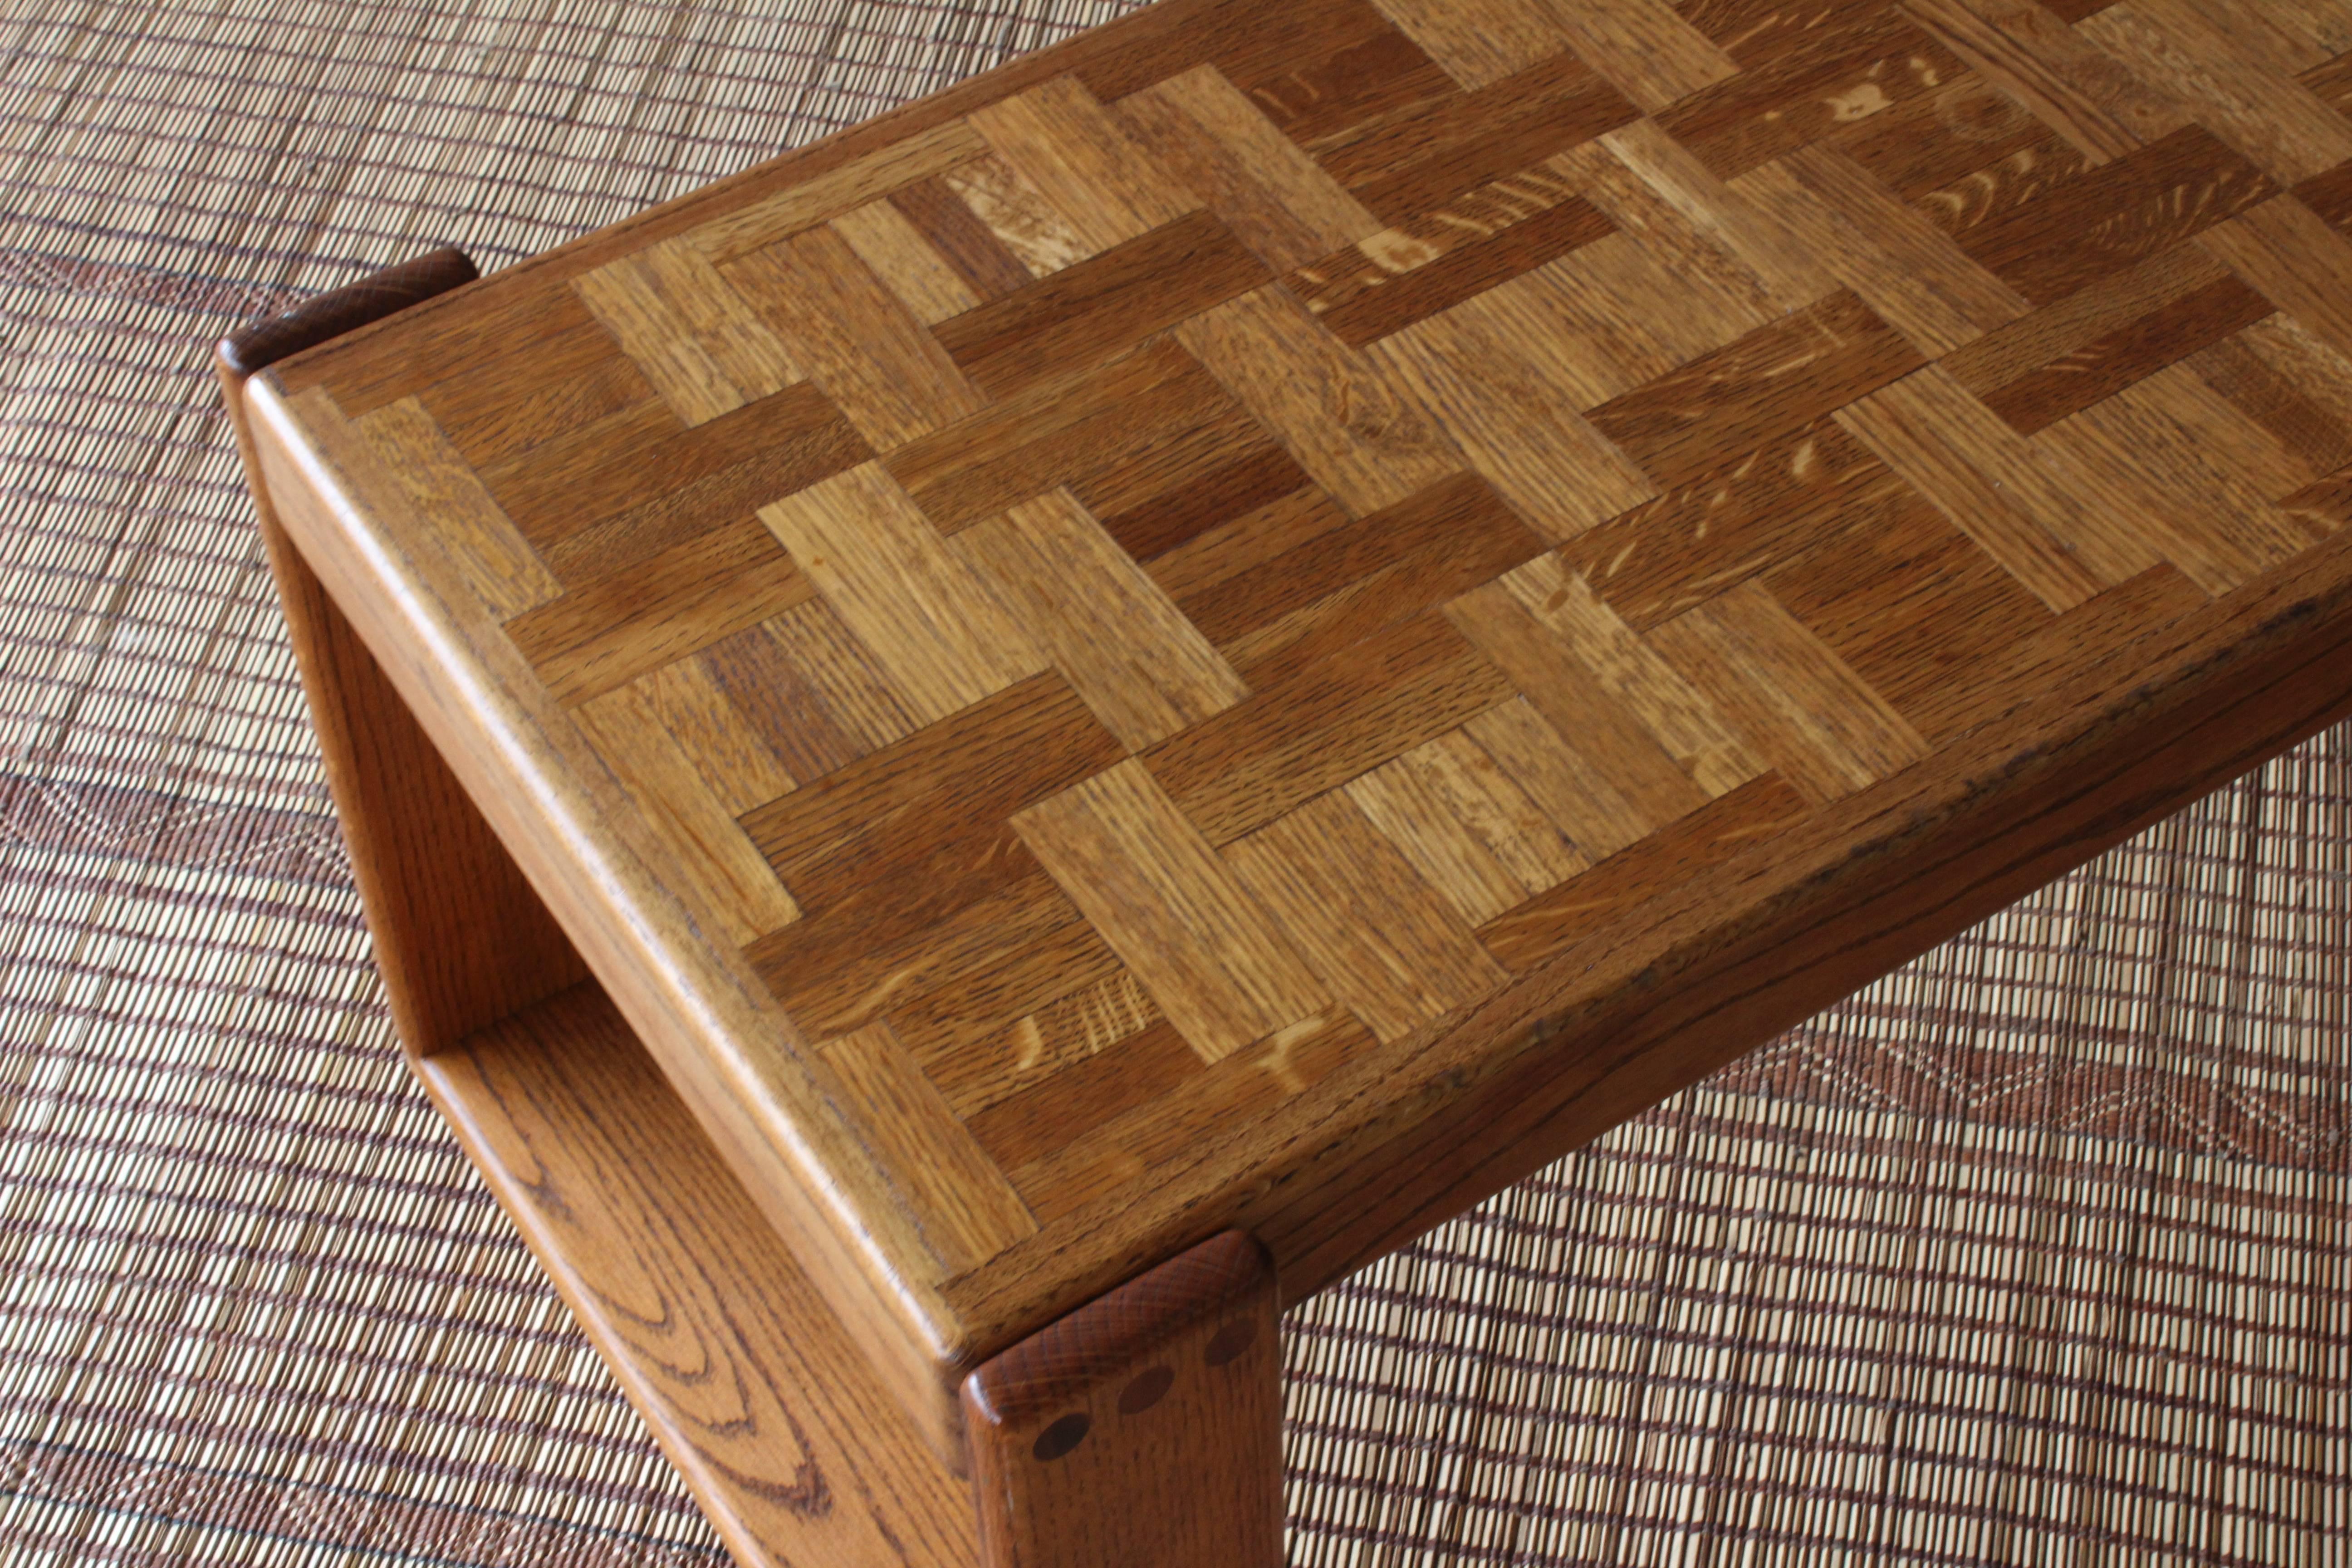 1970s Lou Hodges style coffee table with a parquet oak top.